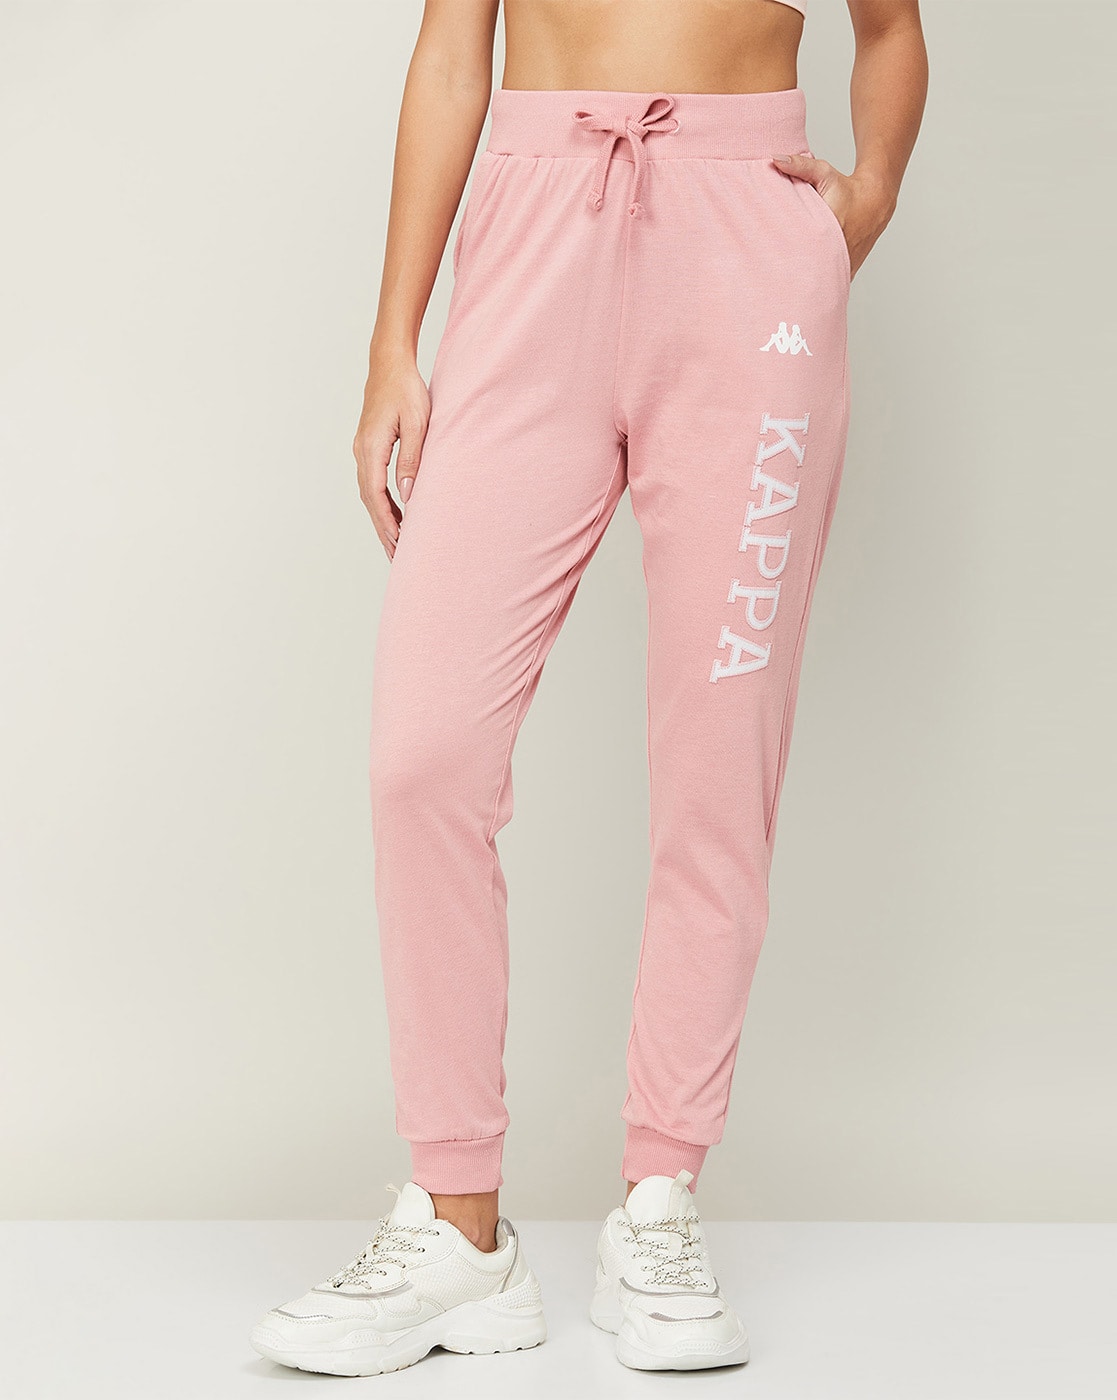 Better Bodies -Feminine track pants with a sporty and modern look.